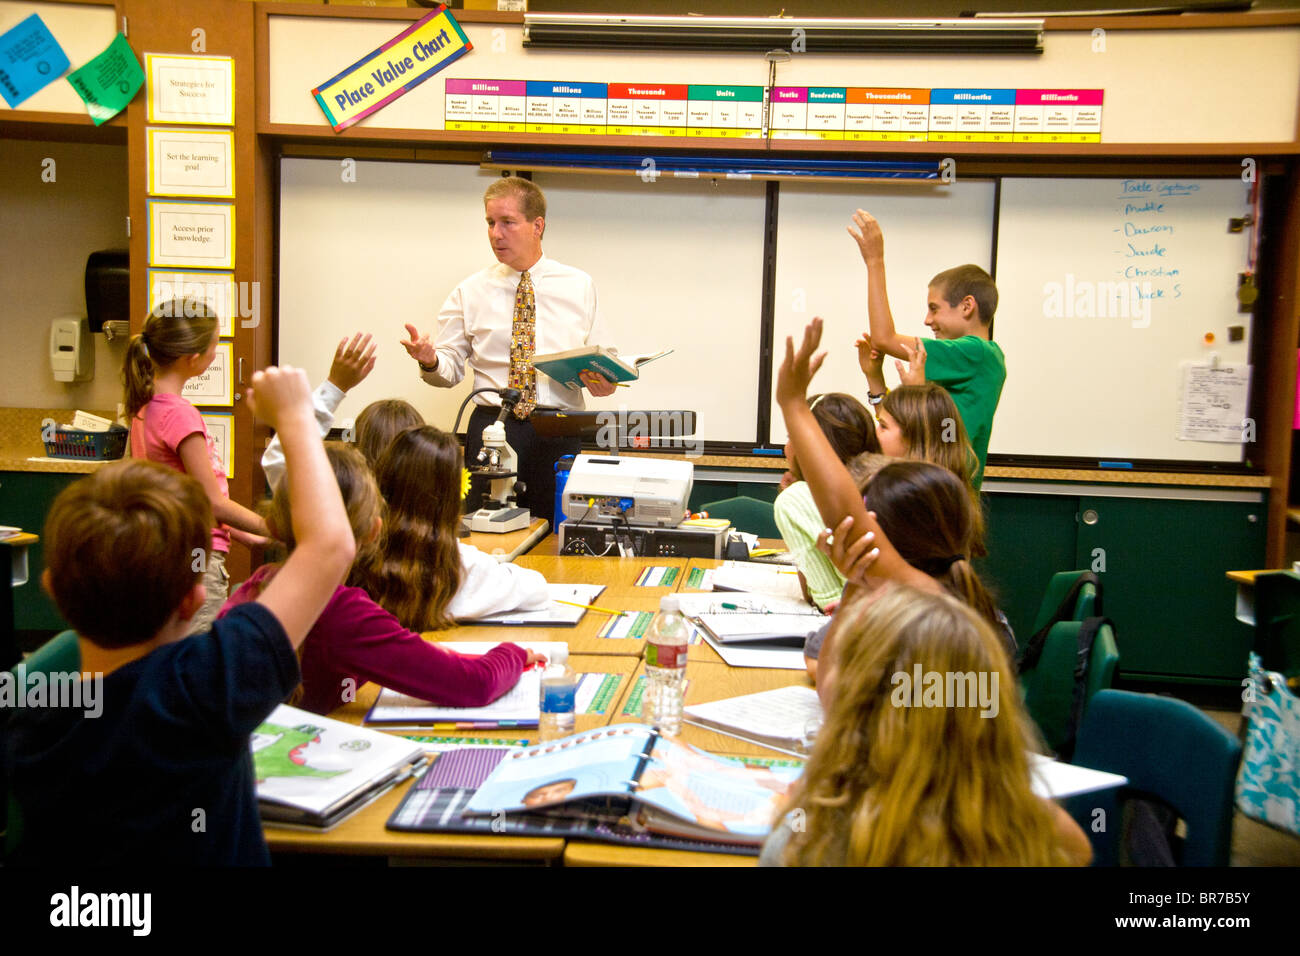 Students' hands go up in answer to a question as a middle school teacher conducts an enthusiastic class in San Clemente, CA. Stock Photo